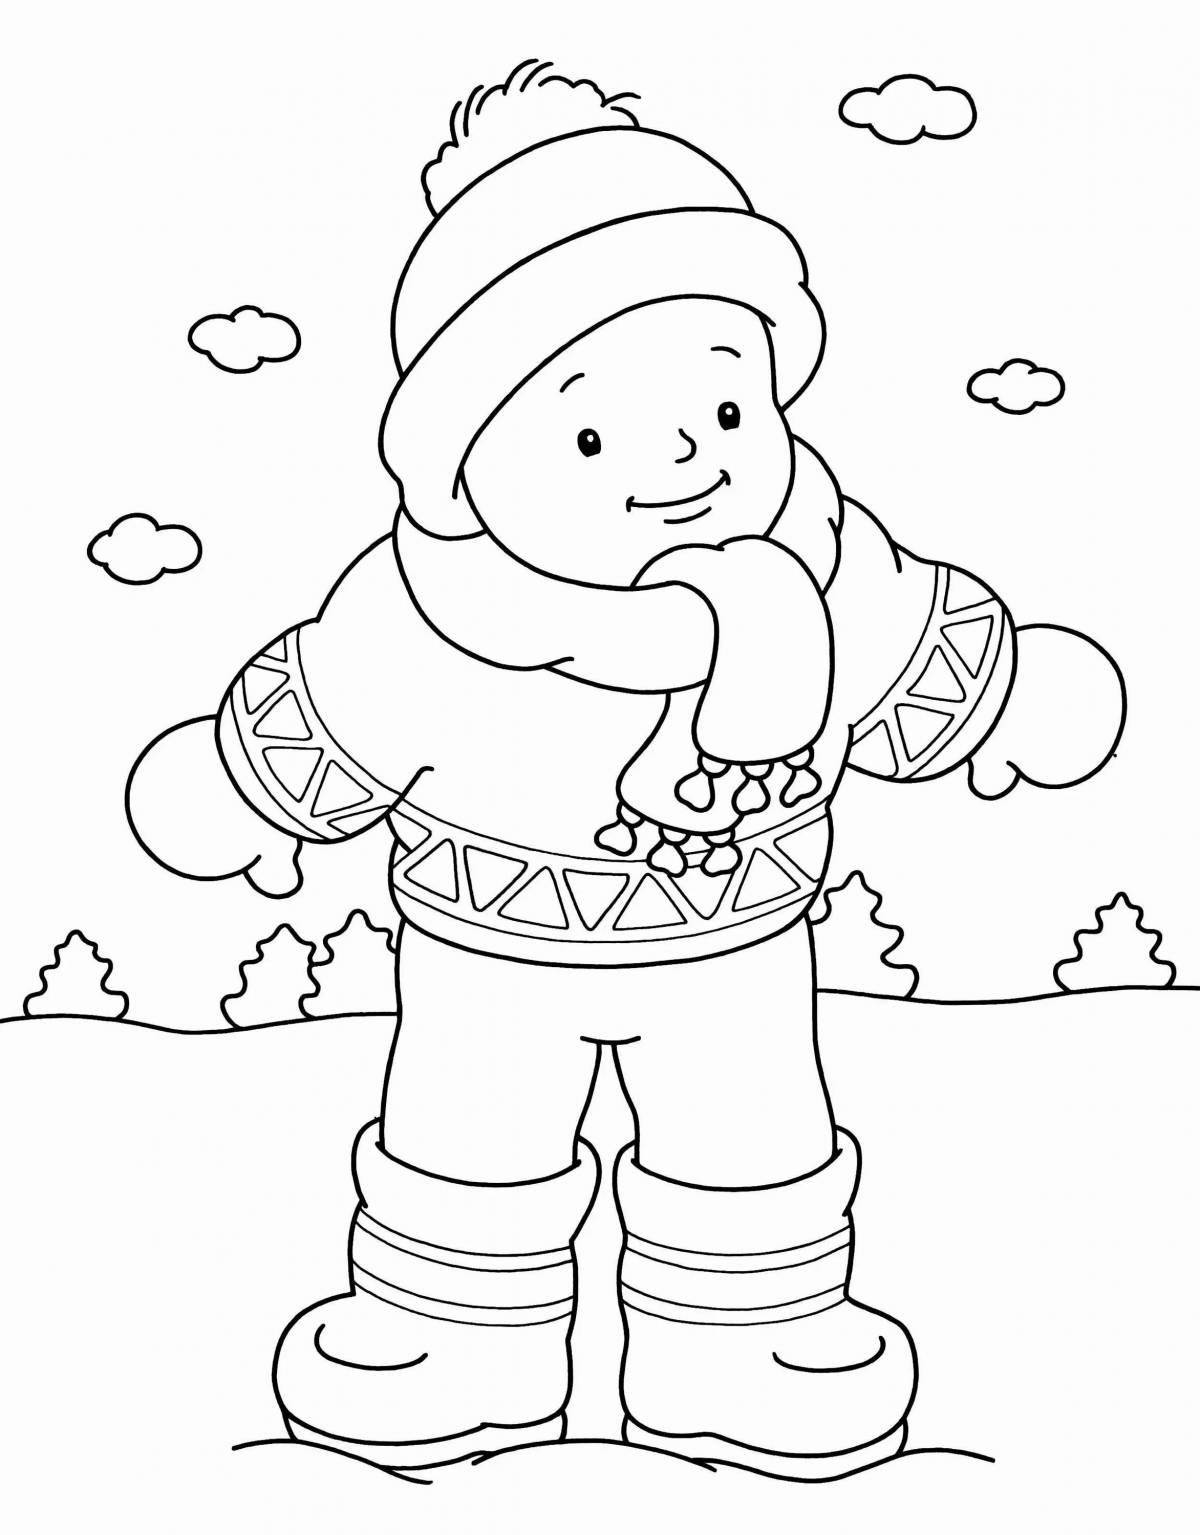 Creative winter clothes coloring page for children 5-6 years old